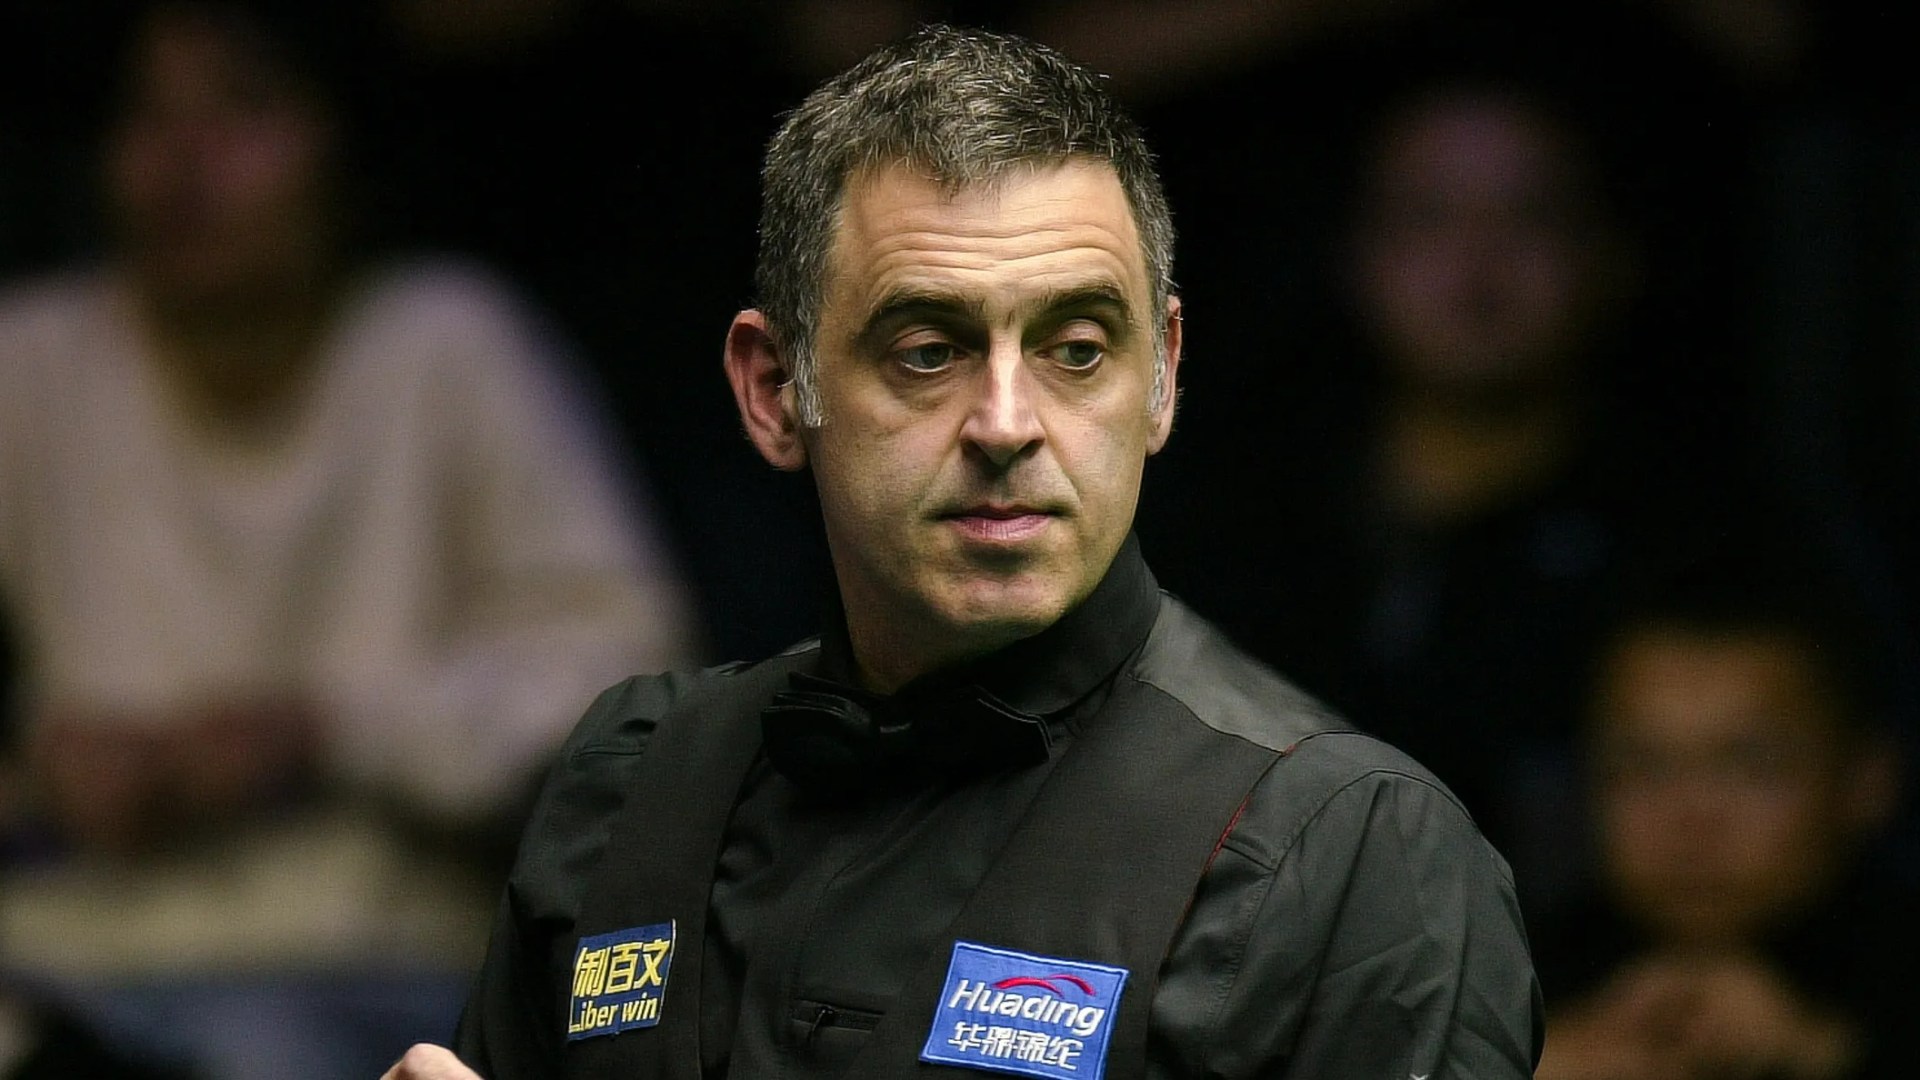 Ronnie O’Sullivan to use exhibitions to sharpen game before World Snooker Championships after shock World Open exit [Video]